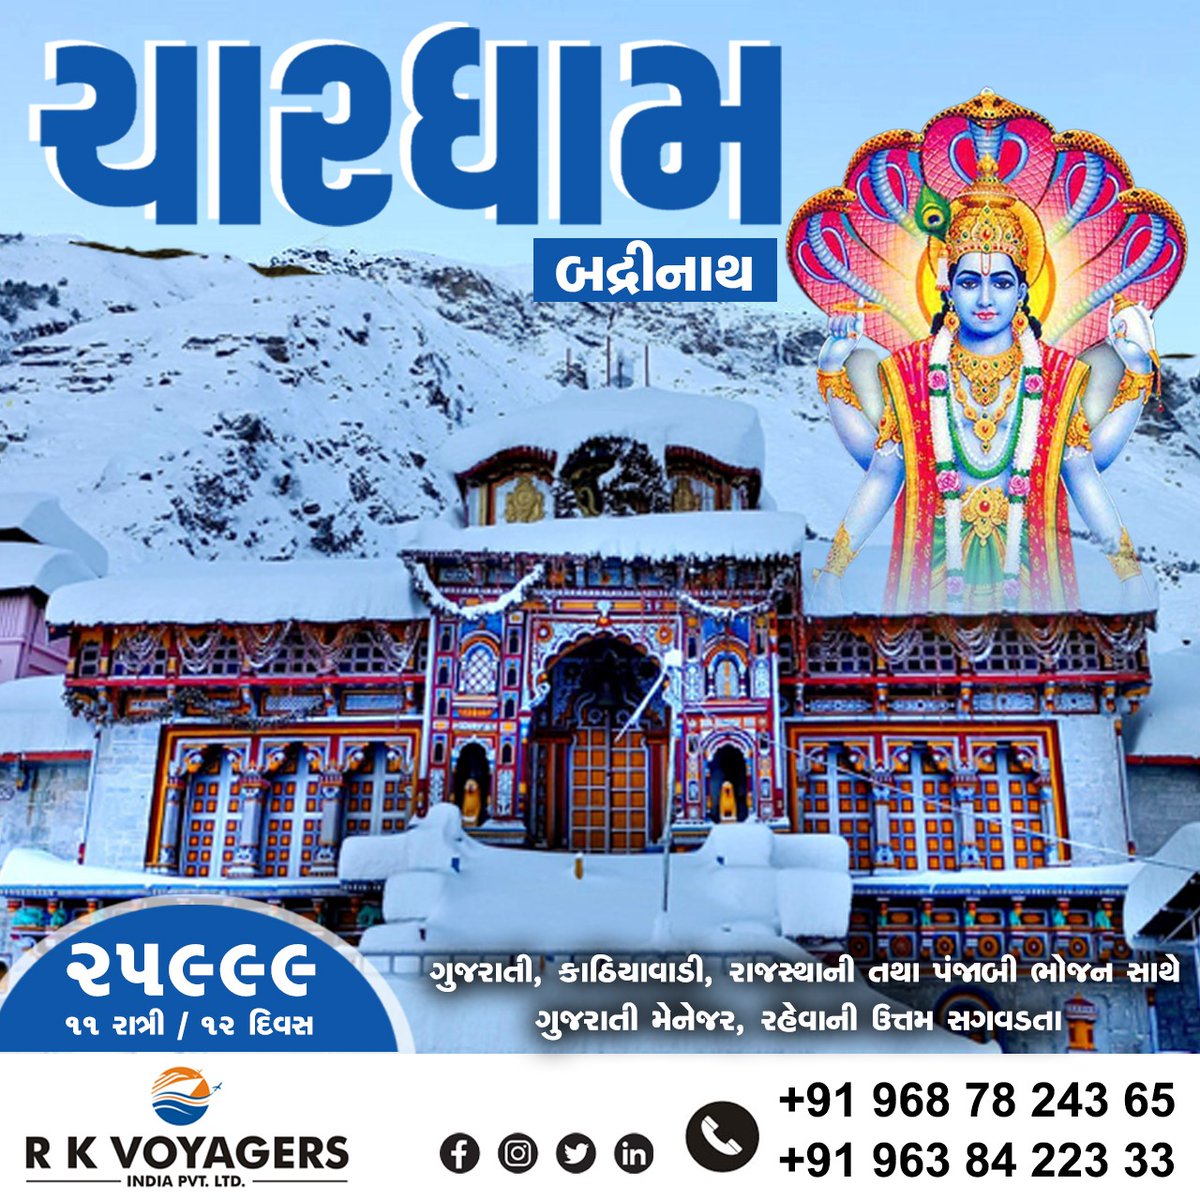 Book your Char Dham Tour Package now and embark on a soulful journey that will transform your life!
EX: AHMEDABAD

Call for the best Package : +91 96878 24365 / +91 96384 22333

#rkvacations #chardham #kedarnath #uttarakhand #badrinath #chardhamyatra #kedarnathtemple #india